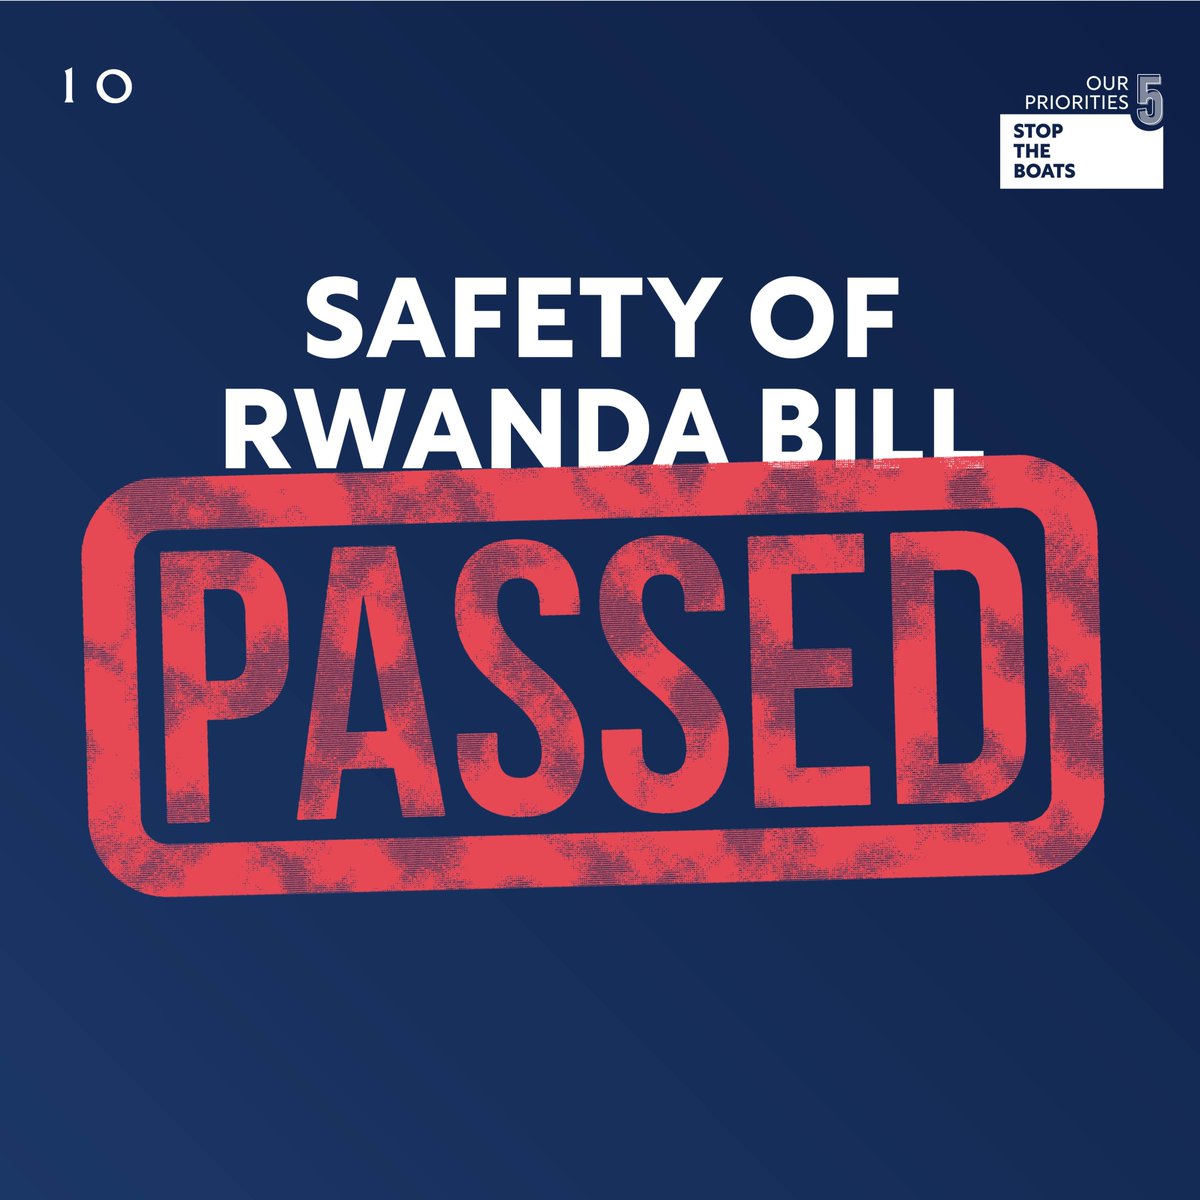 When chatting to #Erewash residents, I know many are concerned about illegal migration. I am delighted that Parliament has been able to pass the Safety of Rwanda Bill which will allow us to get the flights off the ground over the coming weeks.